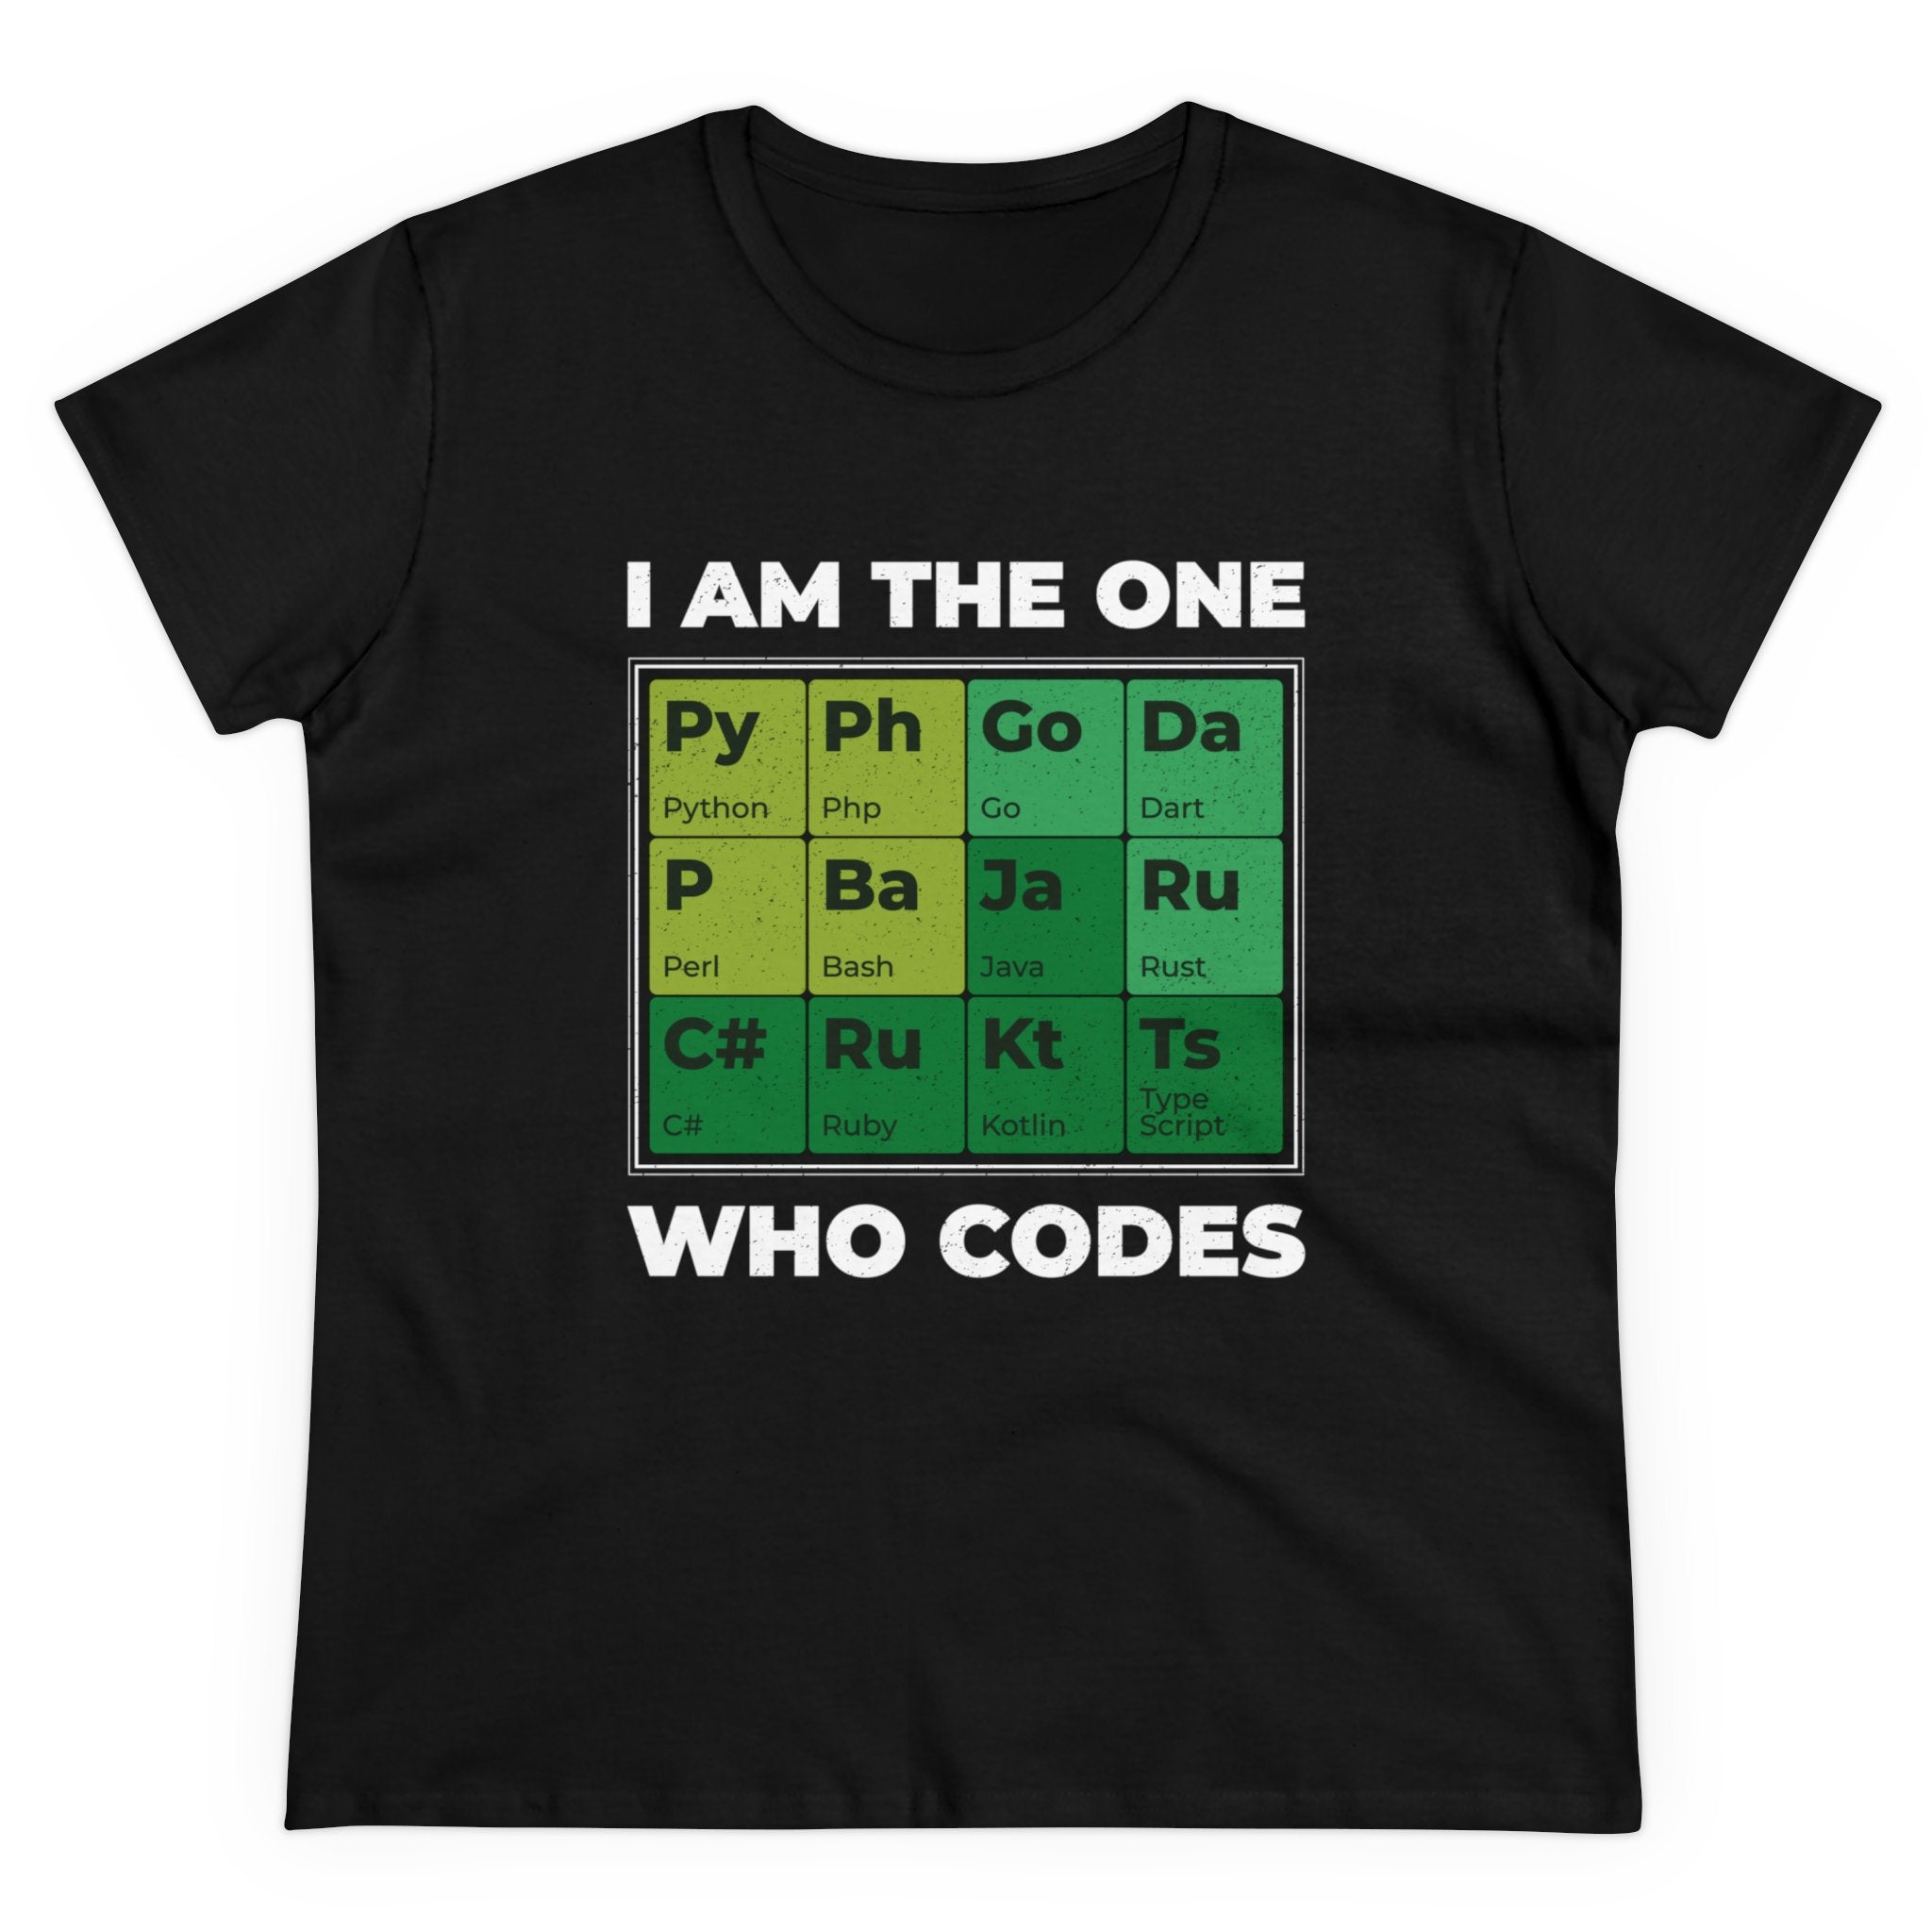 Developer Periodic Table - Women's Tee featuring a design resembling a periodic table showcasing various programming languages. The text reads "I AM THE ONE WHO CODES," bringing a touch of geek chic to your wardrobe.